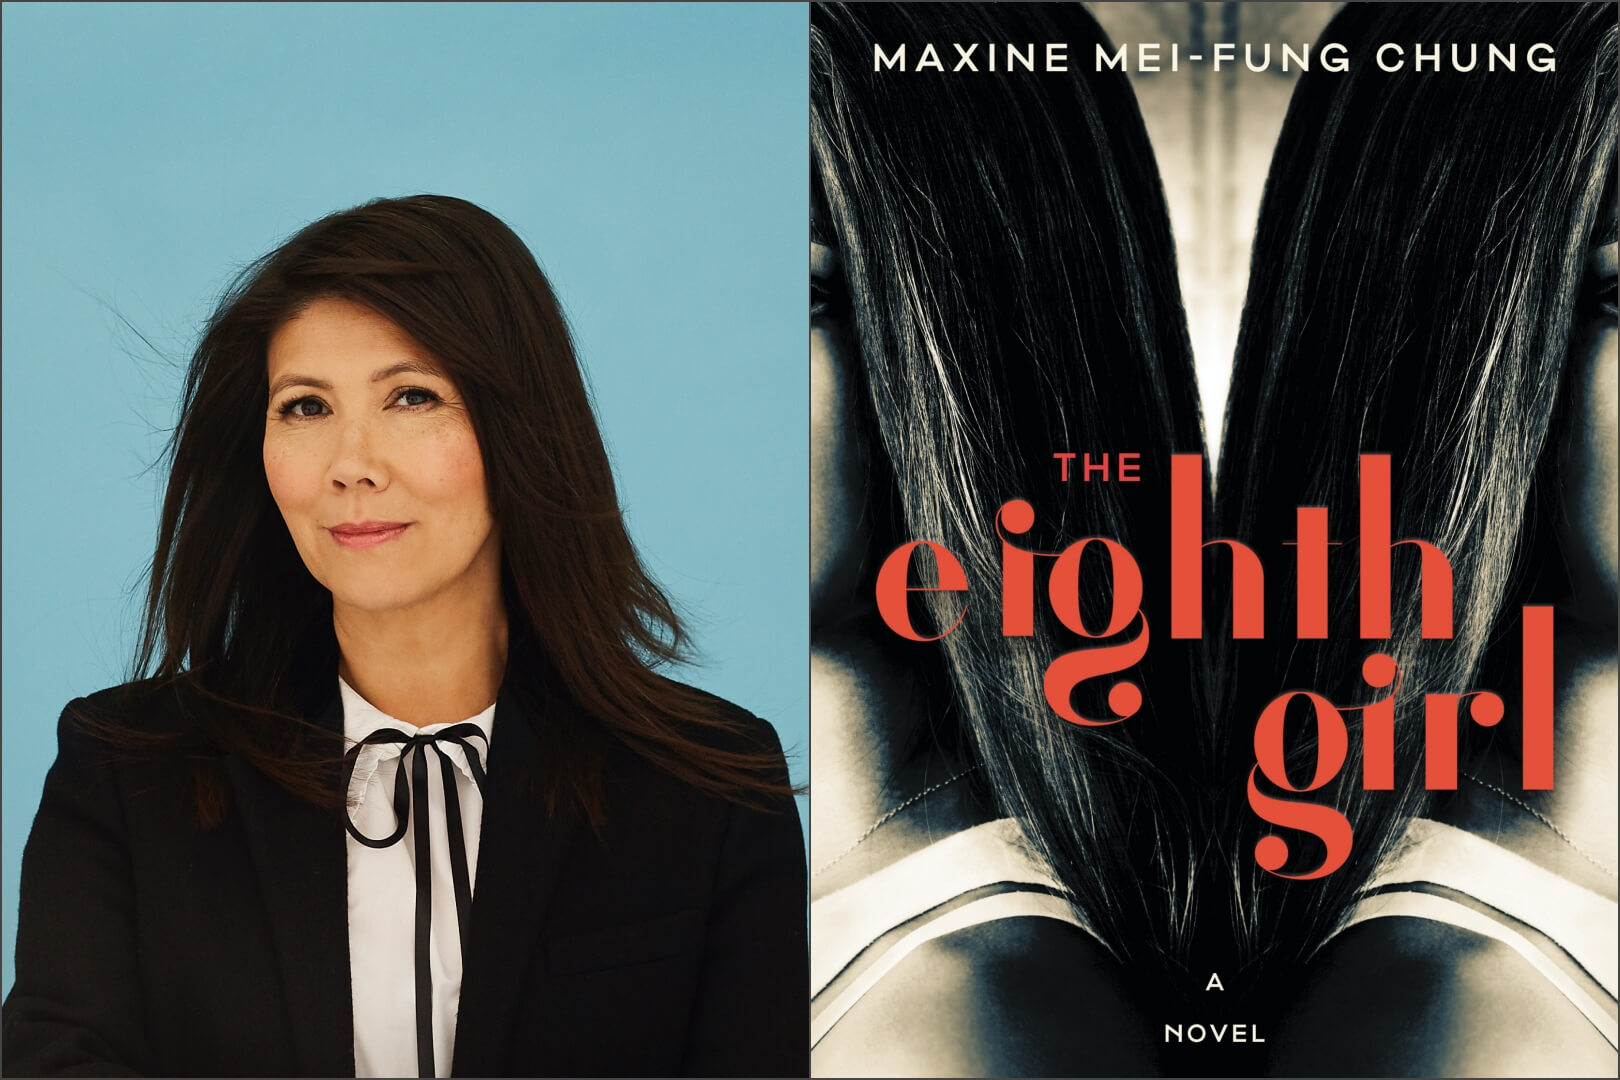 Q&A with Maxine Mei-Fung Chung, Author of the The Eighth Girl